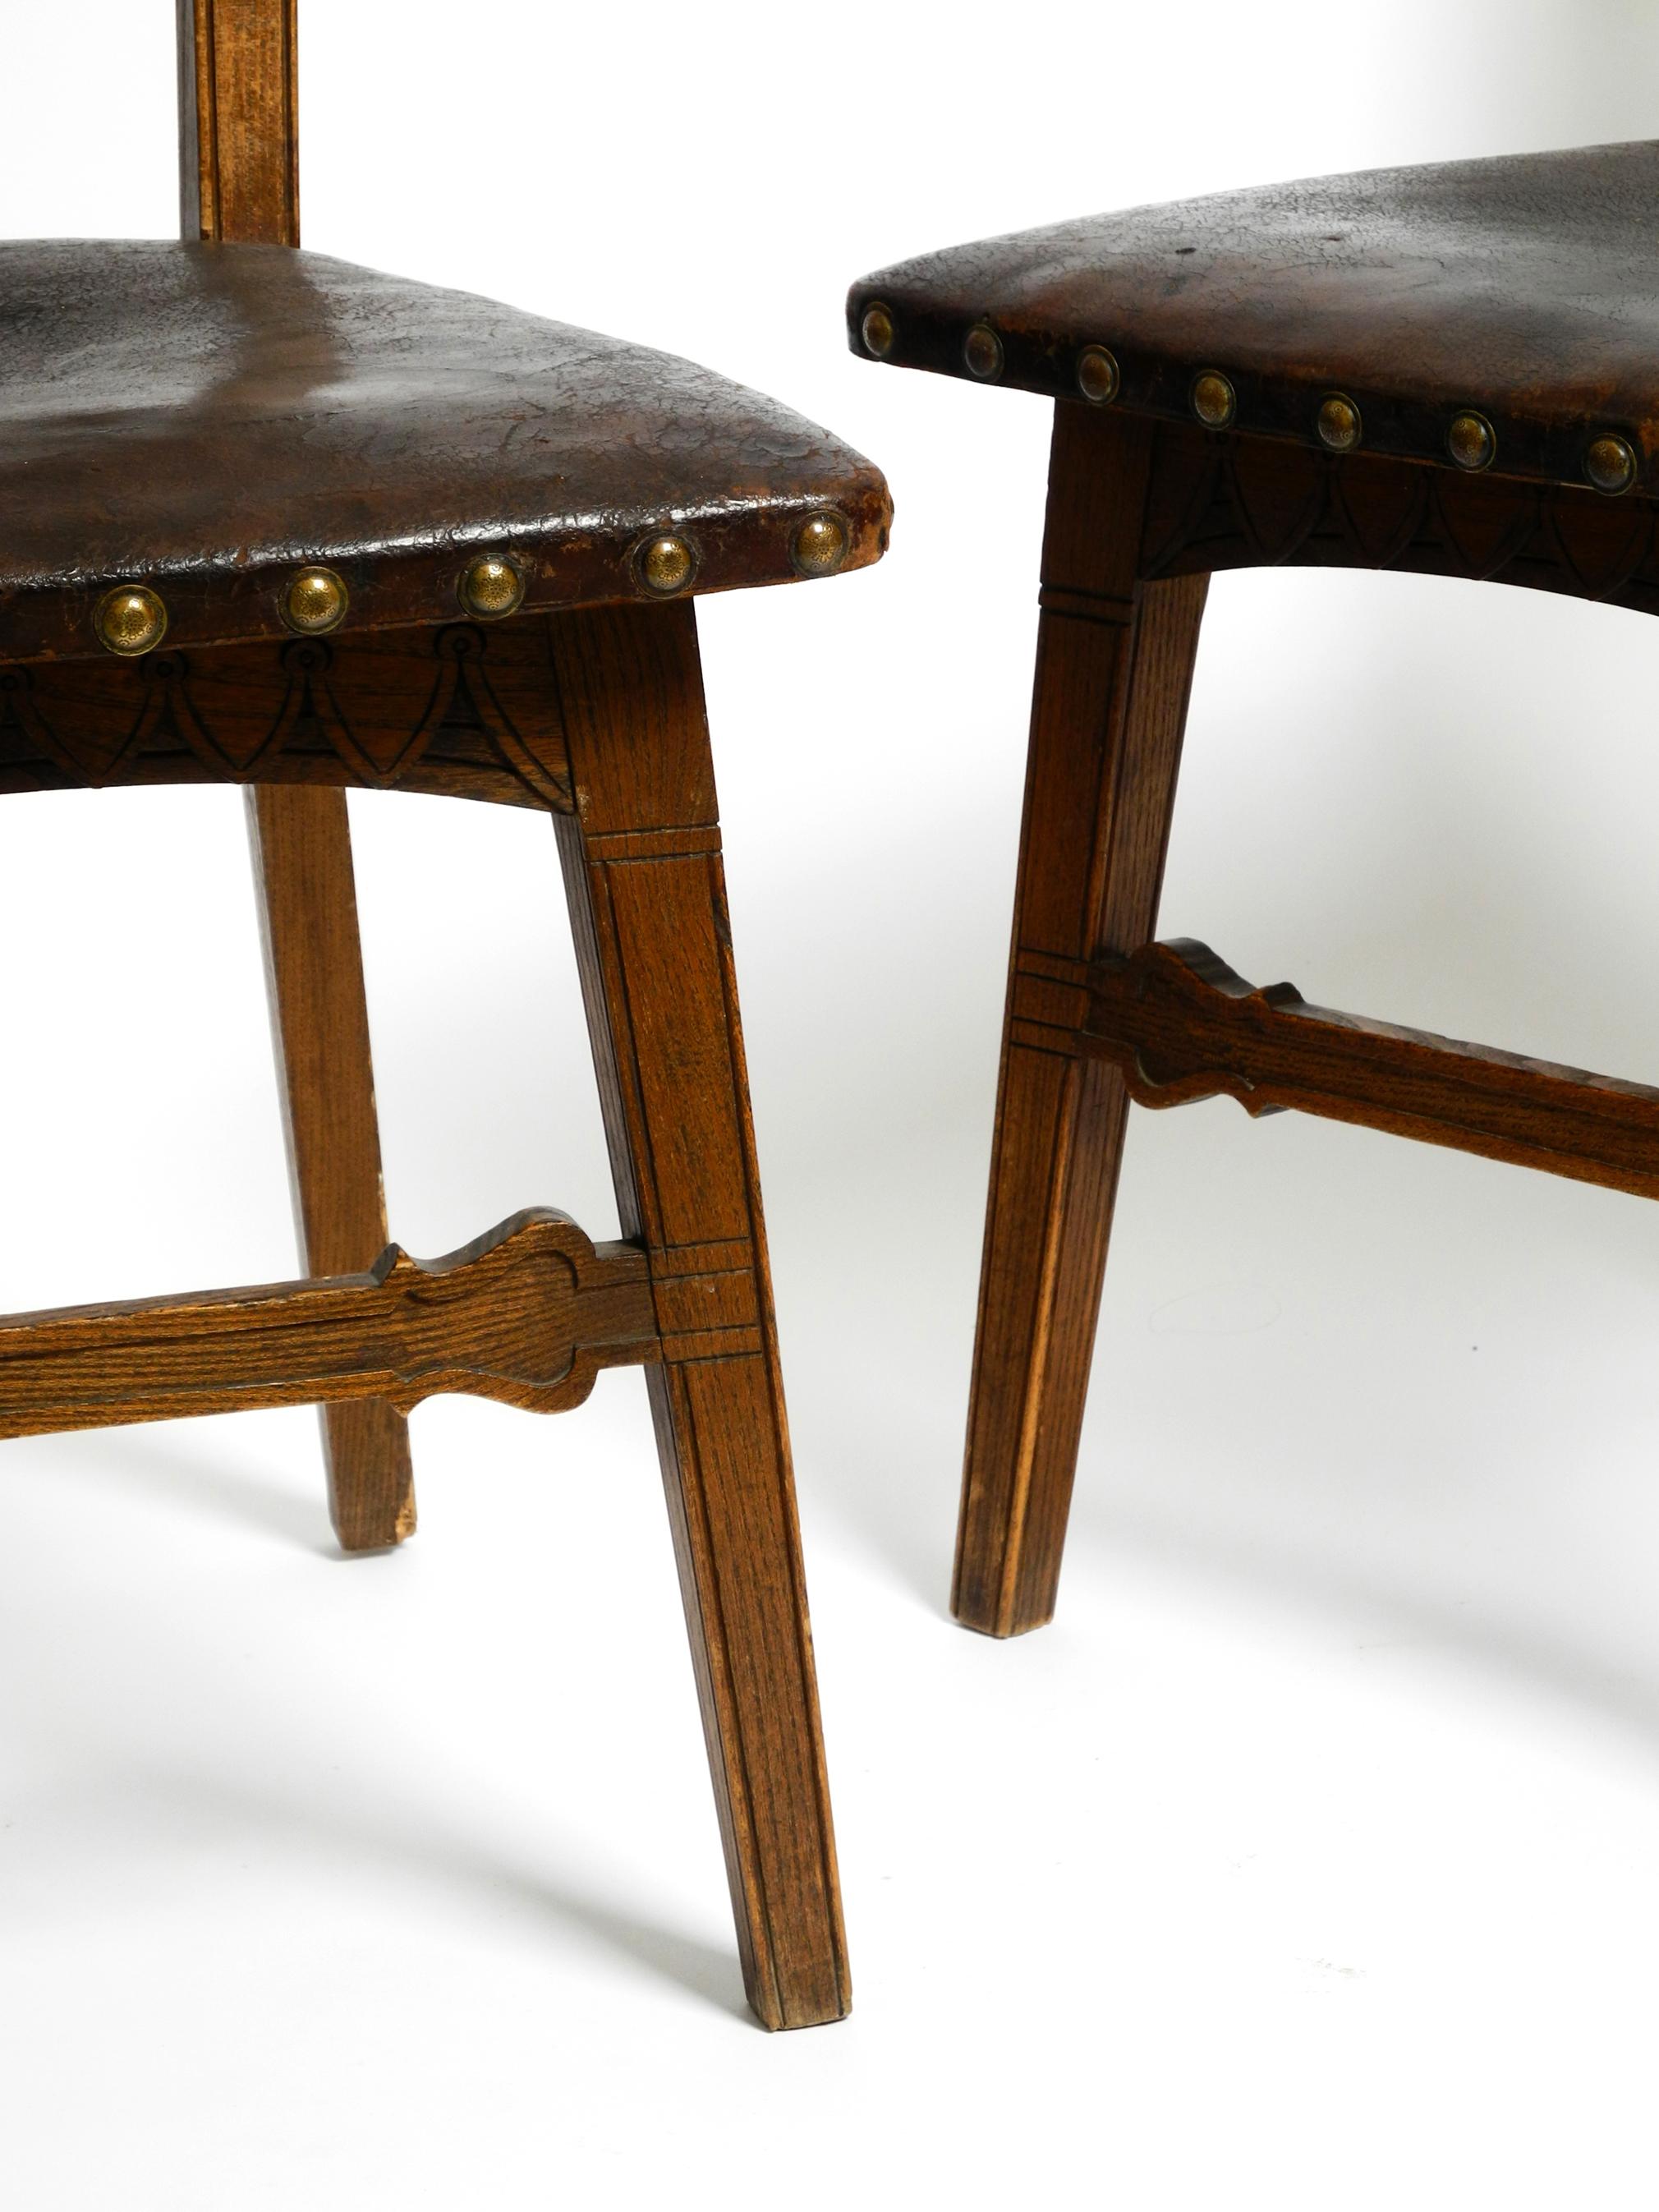 2 Art Nouveau Oak Chairs Still with the Original Leather Seats from Around 1900 For Sale 2